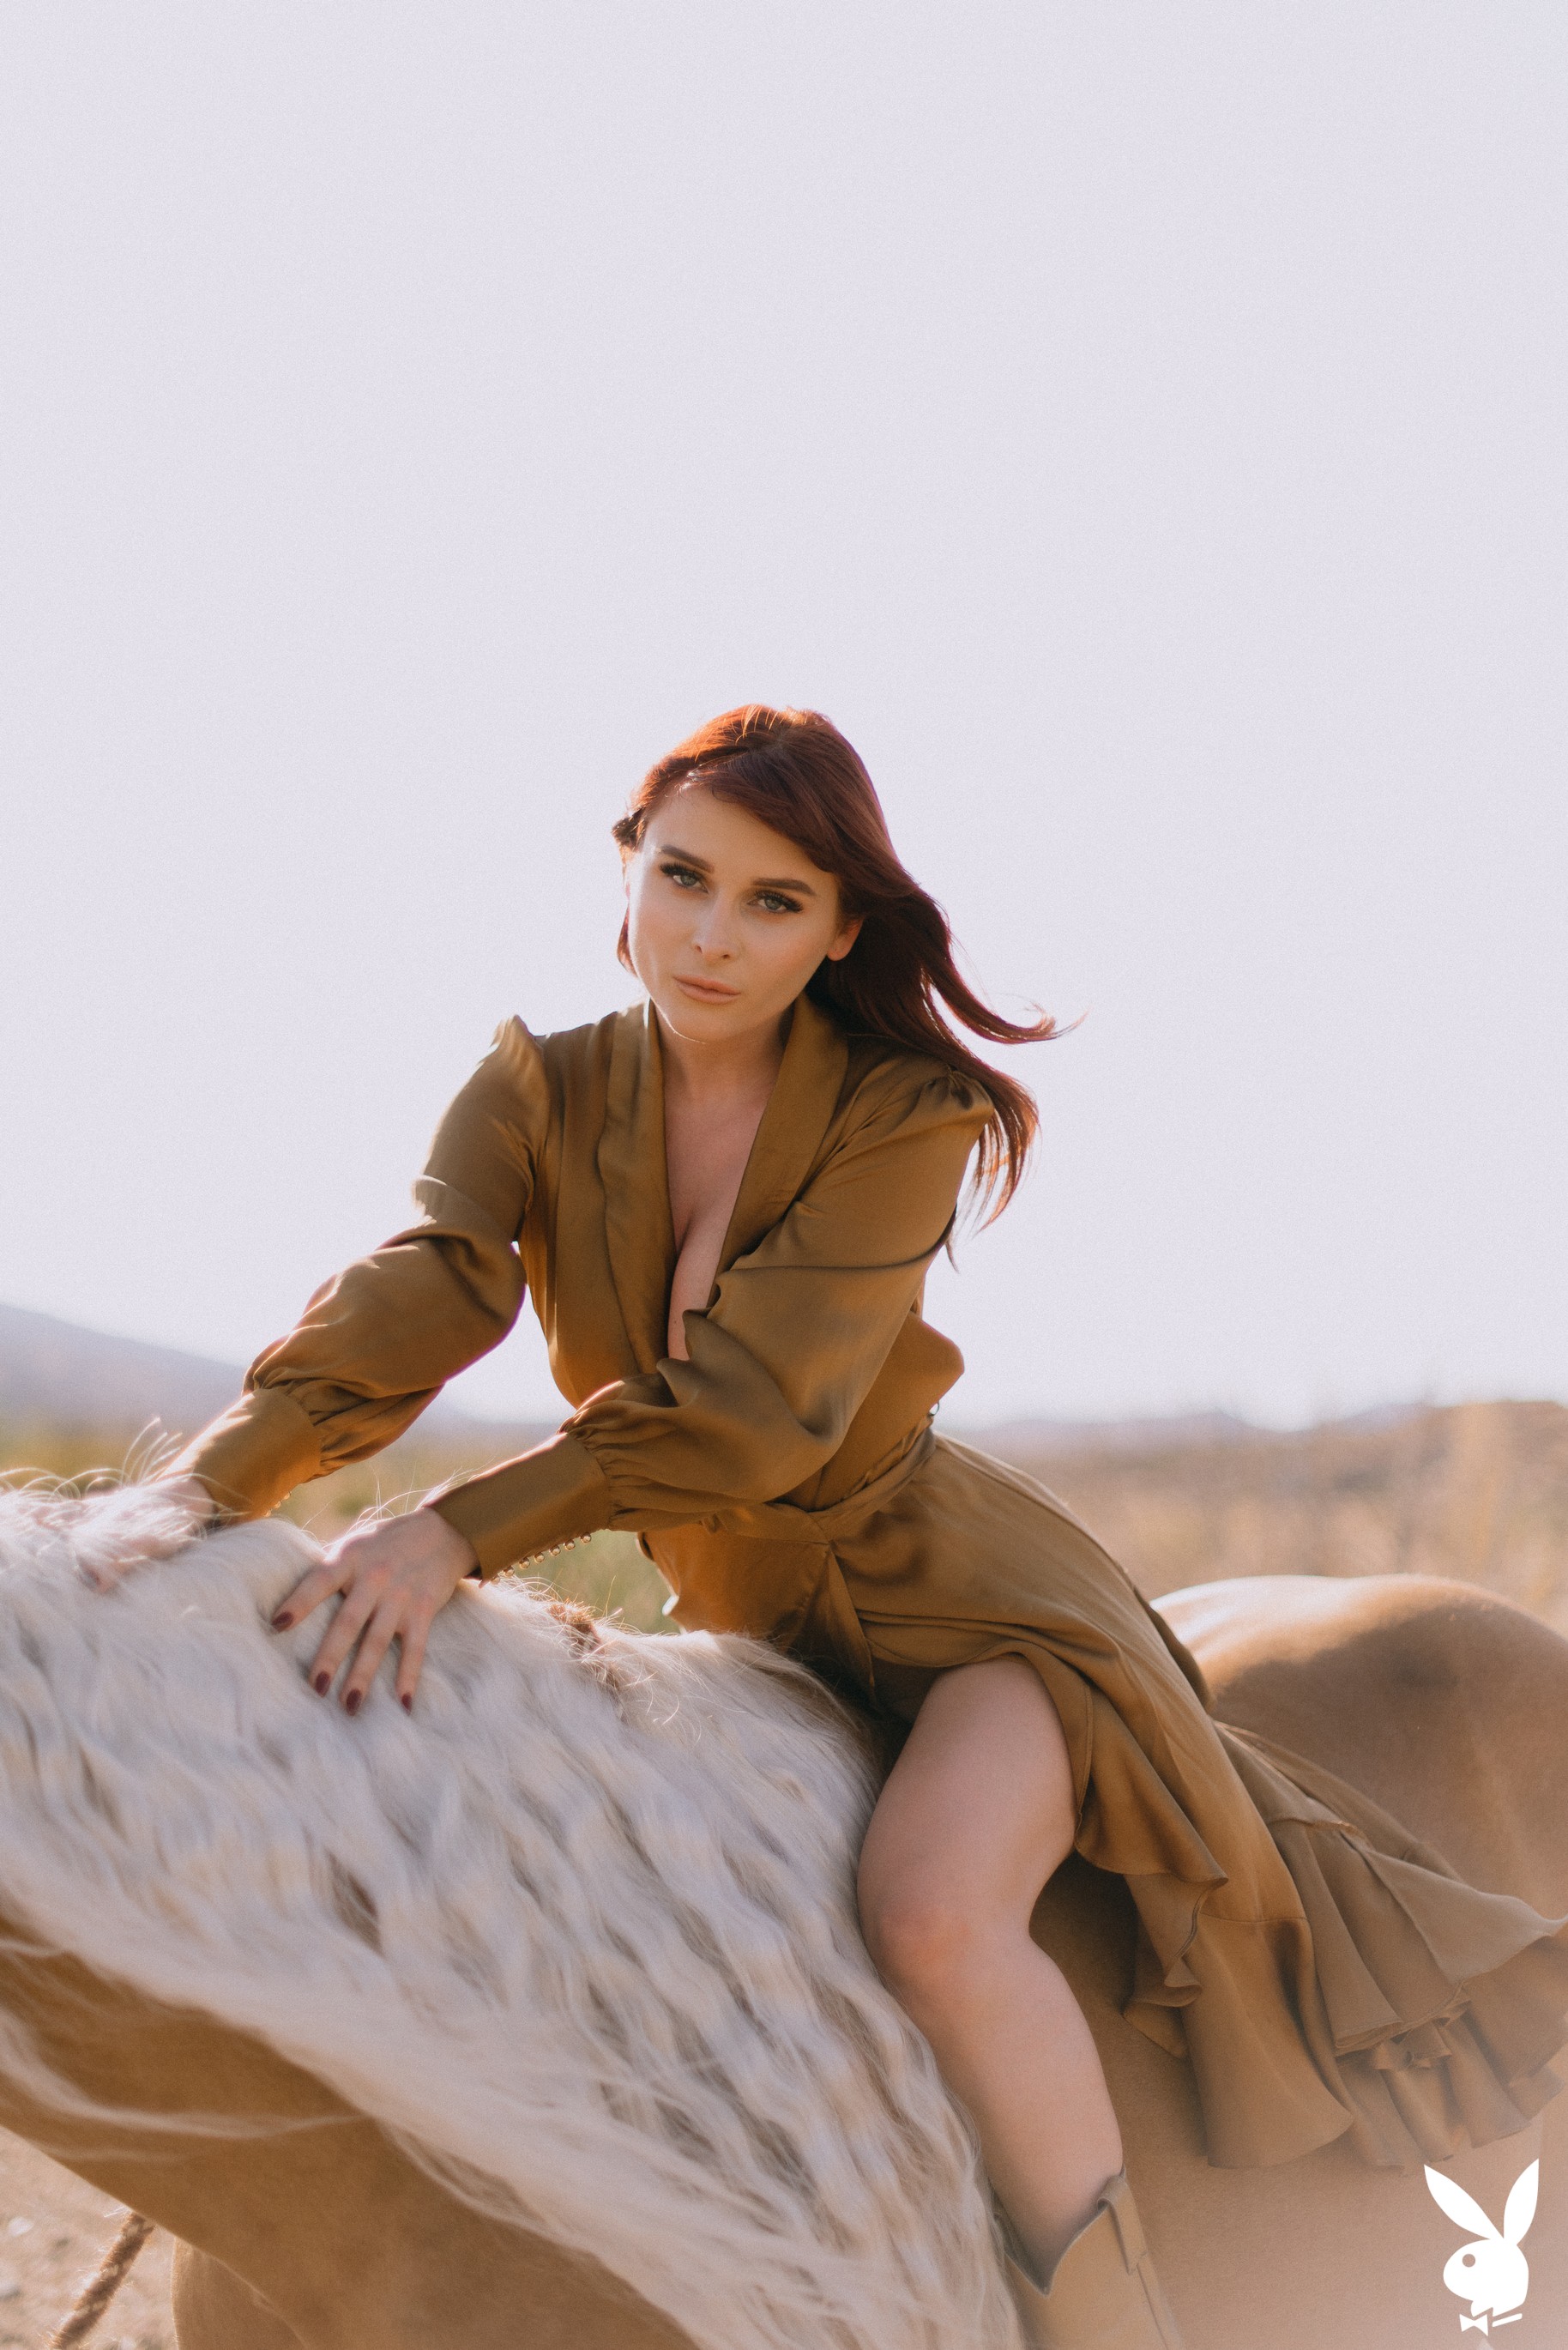 odette-call-of-the-wild-redhead-naked-desert-horse-playboy-06